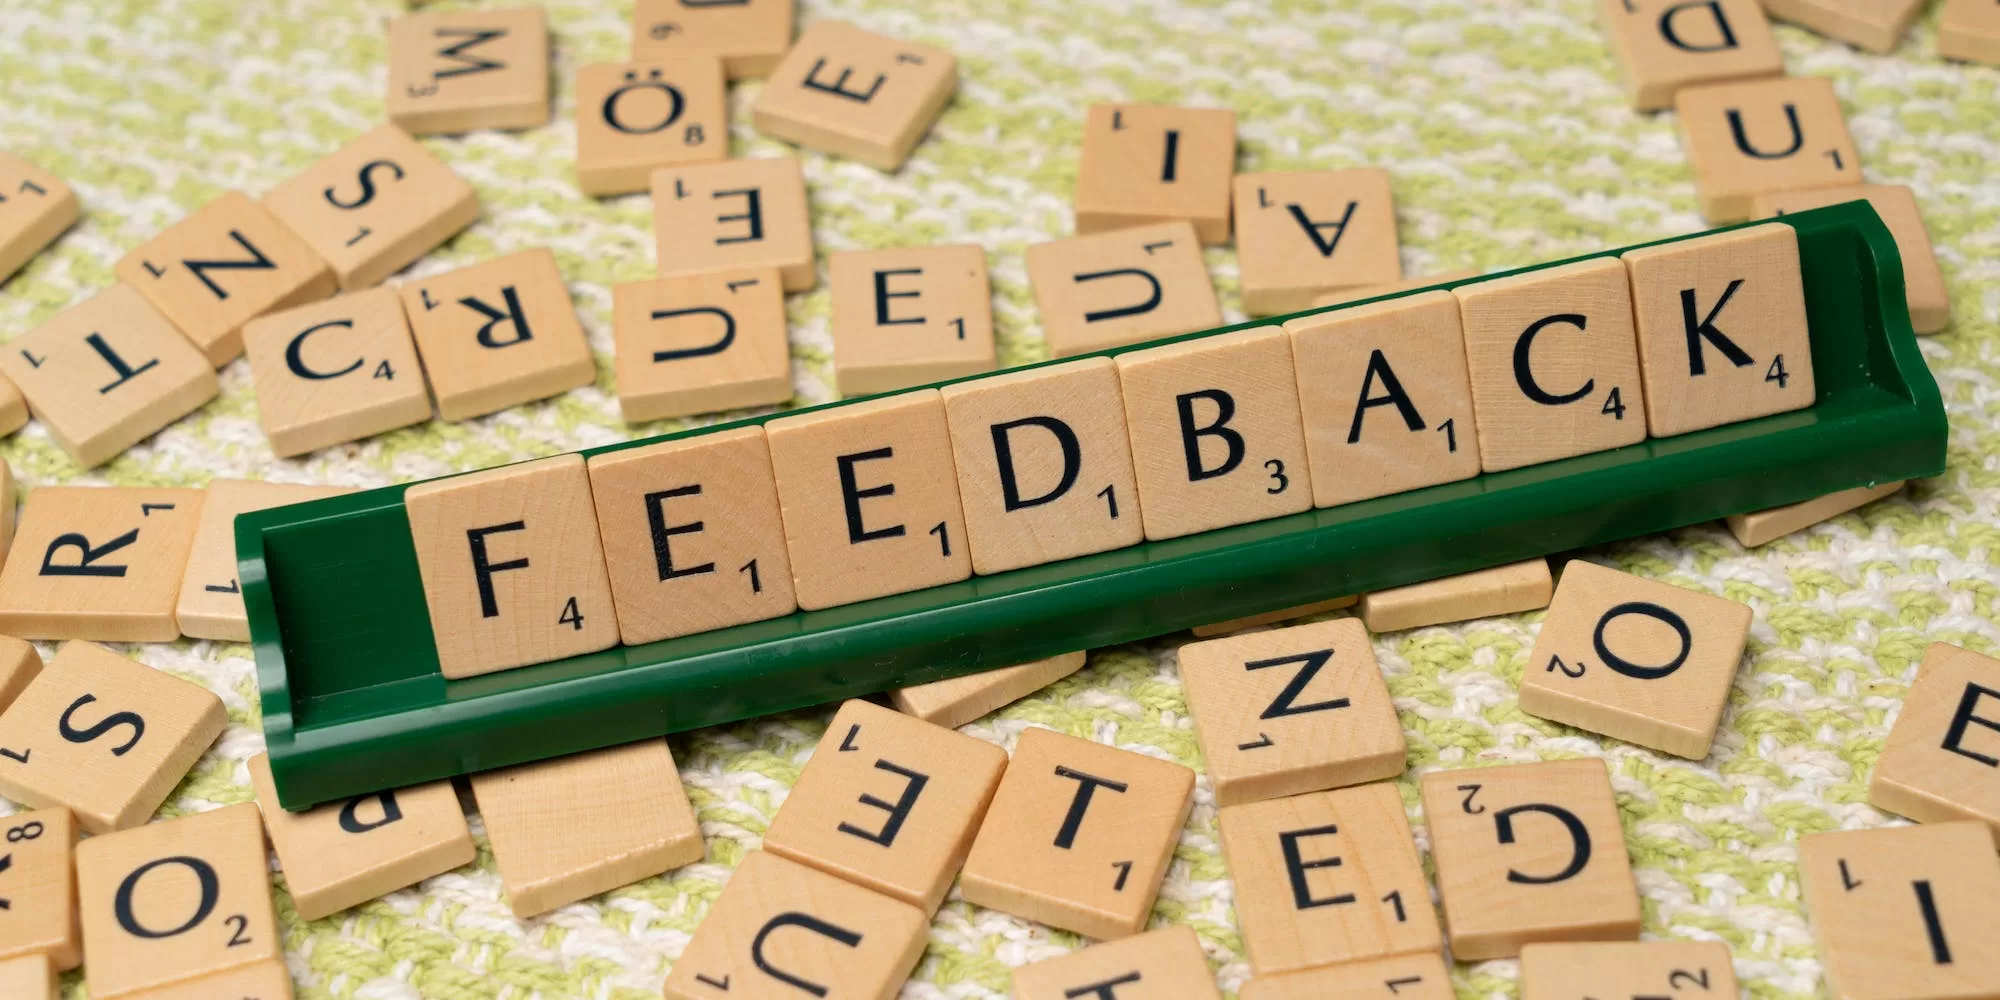 scrabble letter tiles with some letters on a tray spelling feedback Photo by Markus Winkler: https://www.pexels.com/photo/the-word-feedback-is-spelled-out-with-scrabble-tiles-18512803/